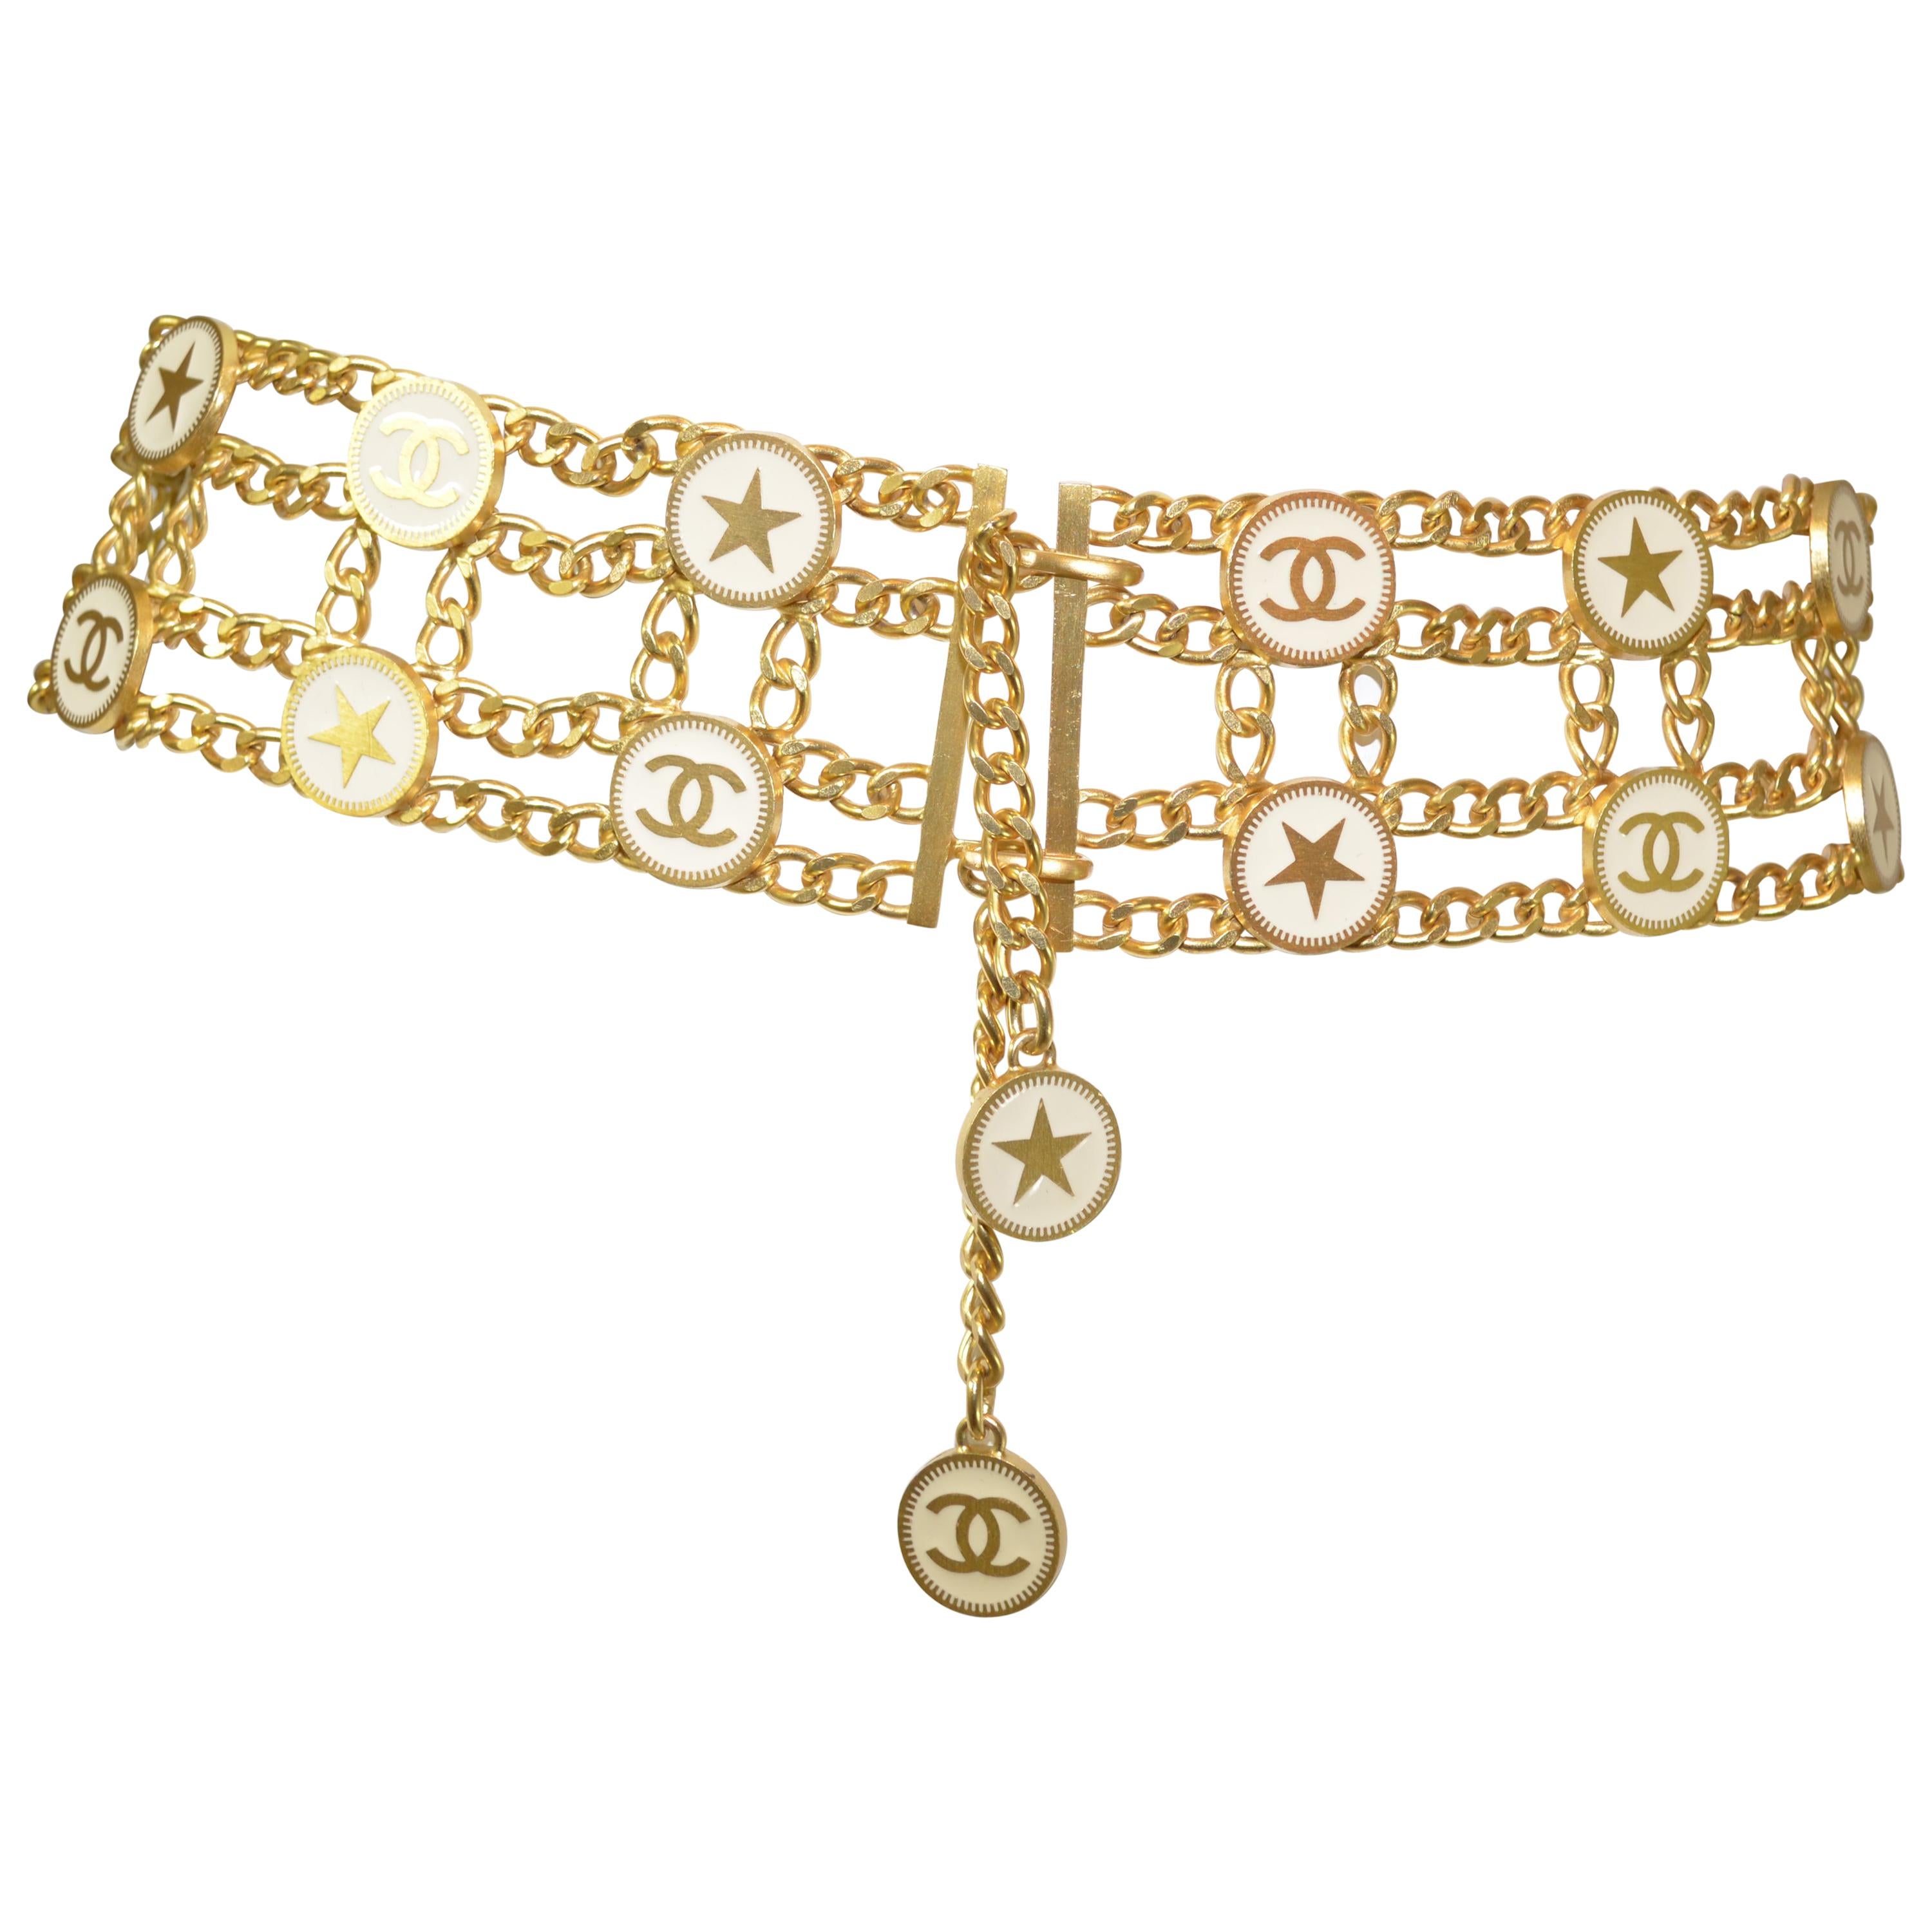 CHANEL GOLD CHAIN BELT WITH BALL CHARMS  RARE VINTAGE  eBay